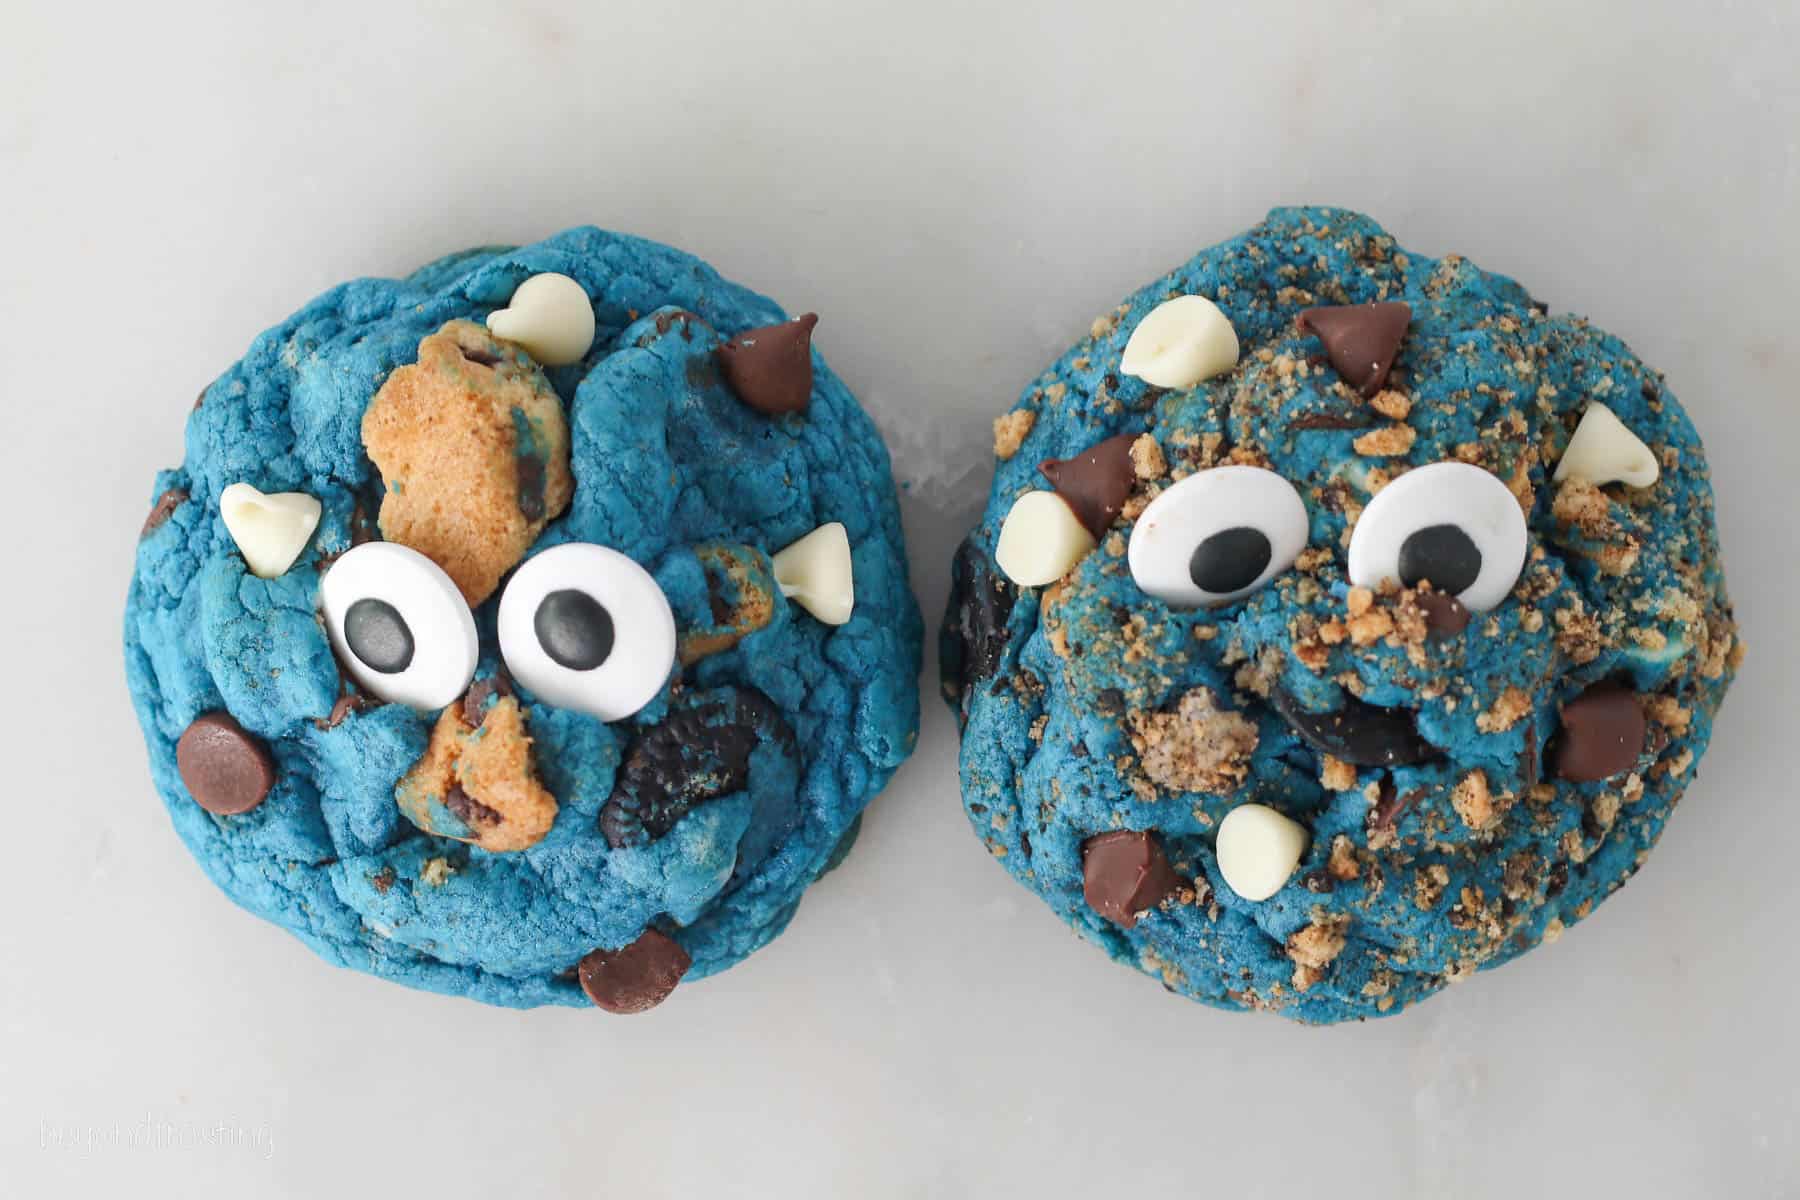 Two Cookie Monster cookies side-by-side, one cookie coated in crumbs and the other without.